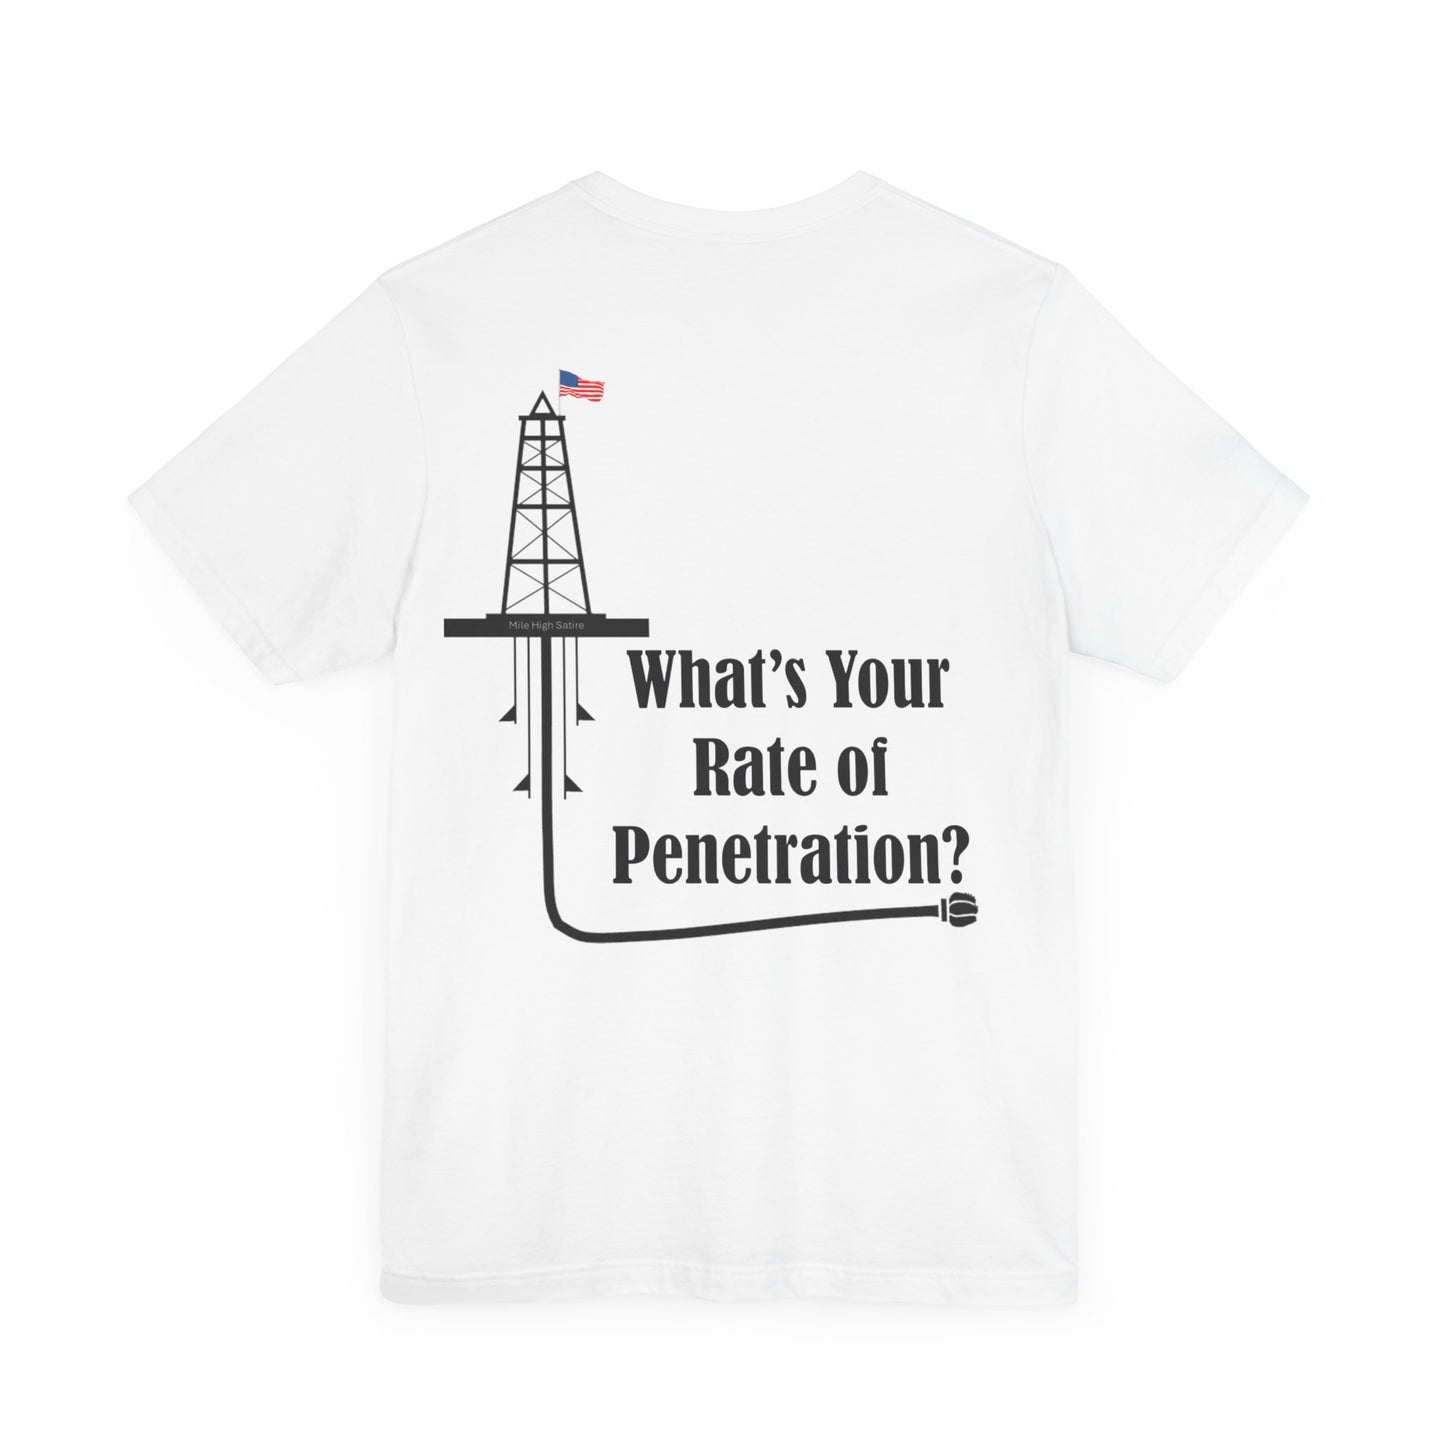 What's Your Rate of Penetration?